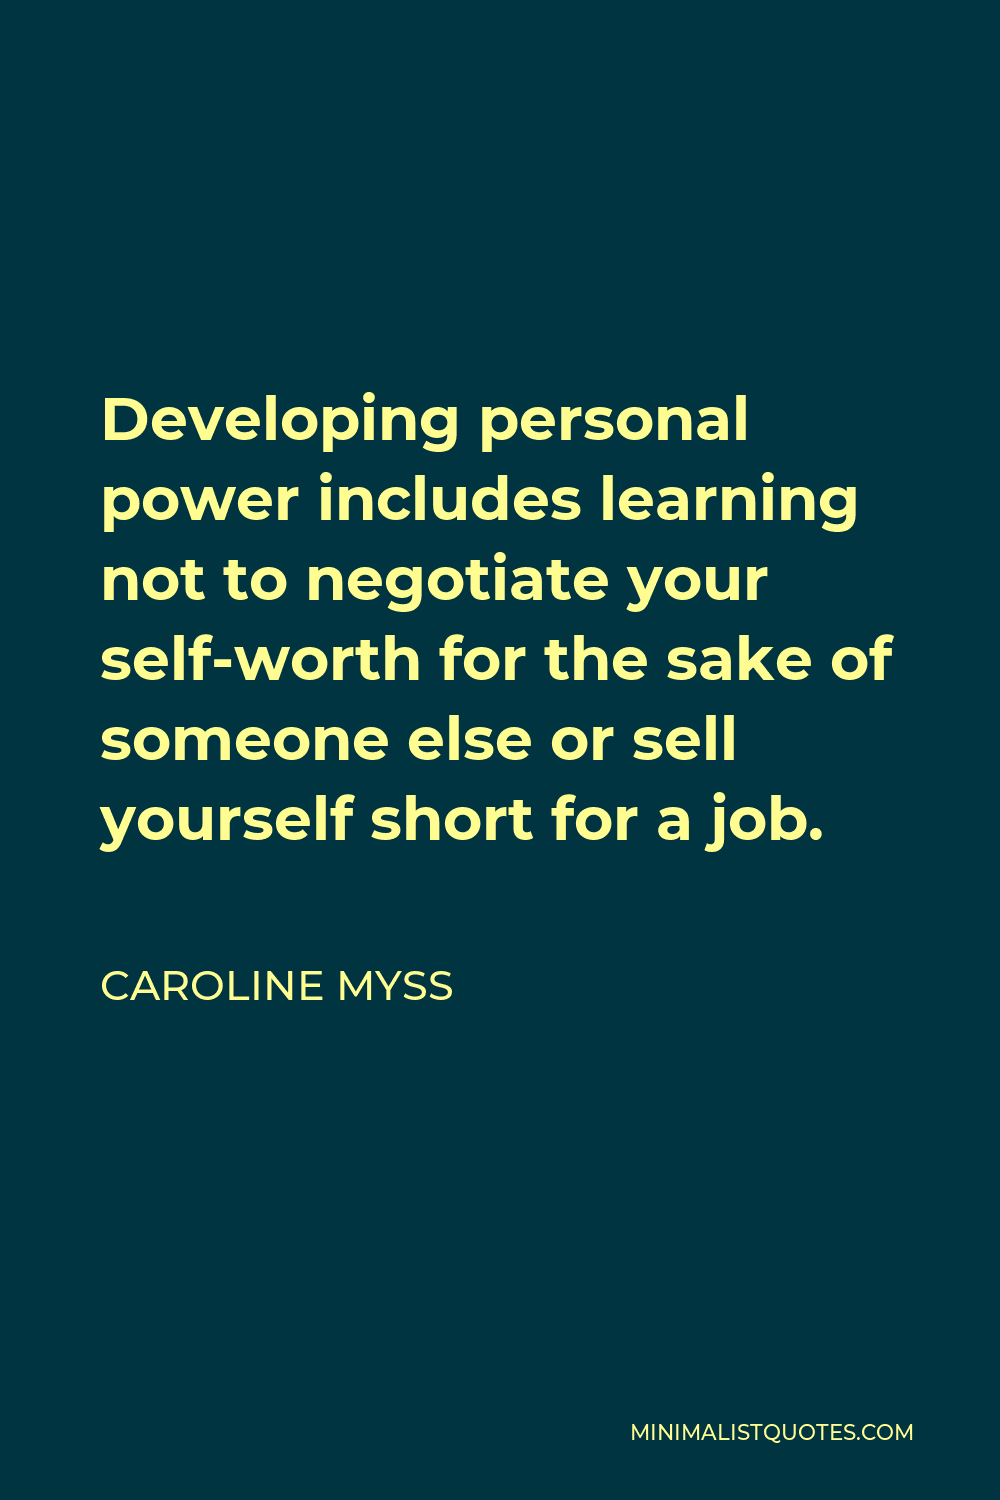 Caroline Myss Quote - Developing personal power includes learning not to negotiate your self-worth for the sake of someone else or sell yourself short for a job.